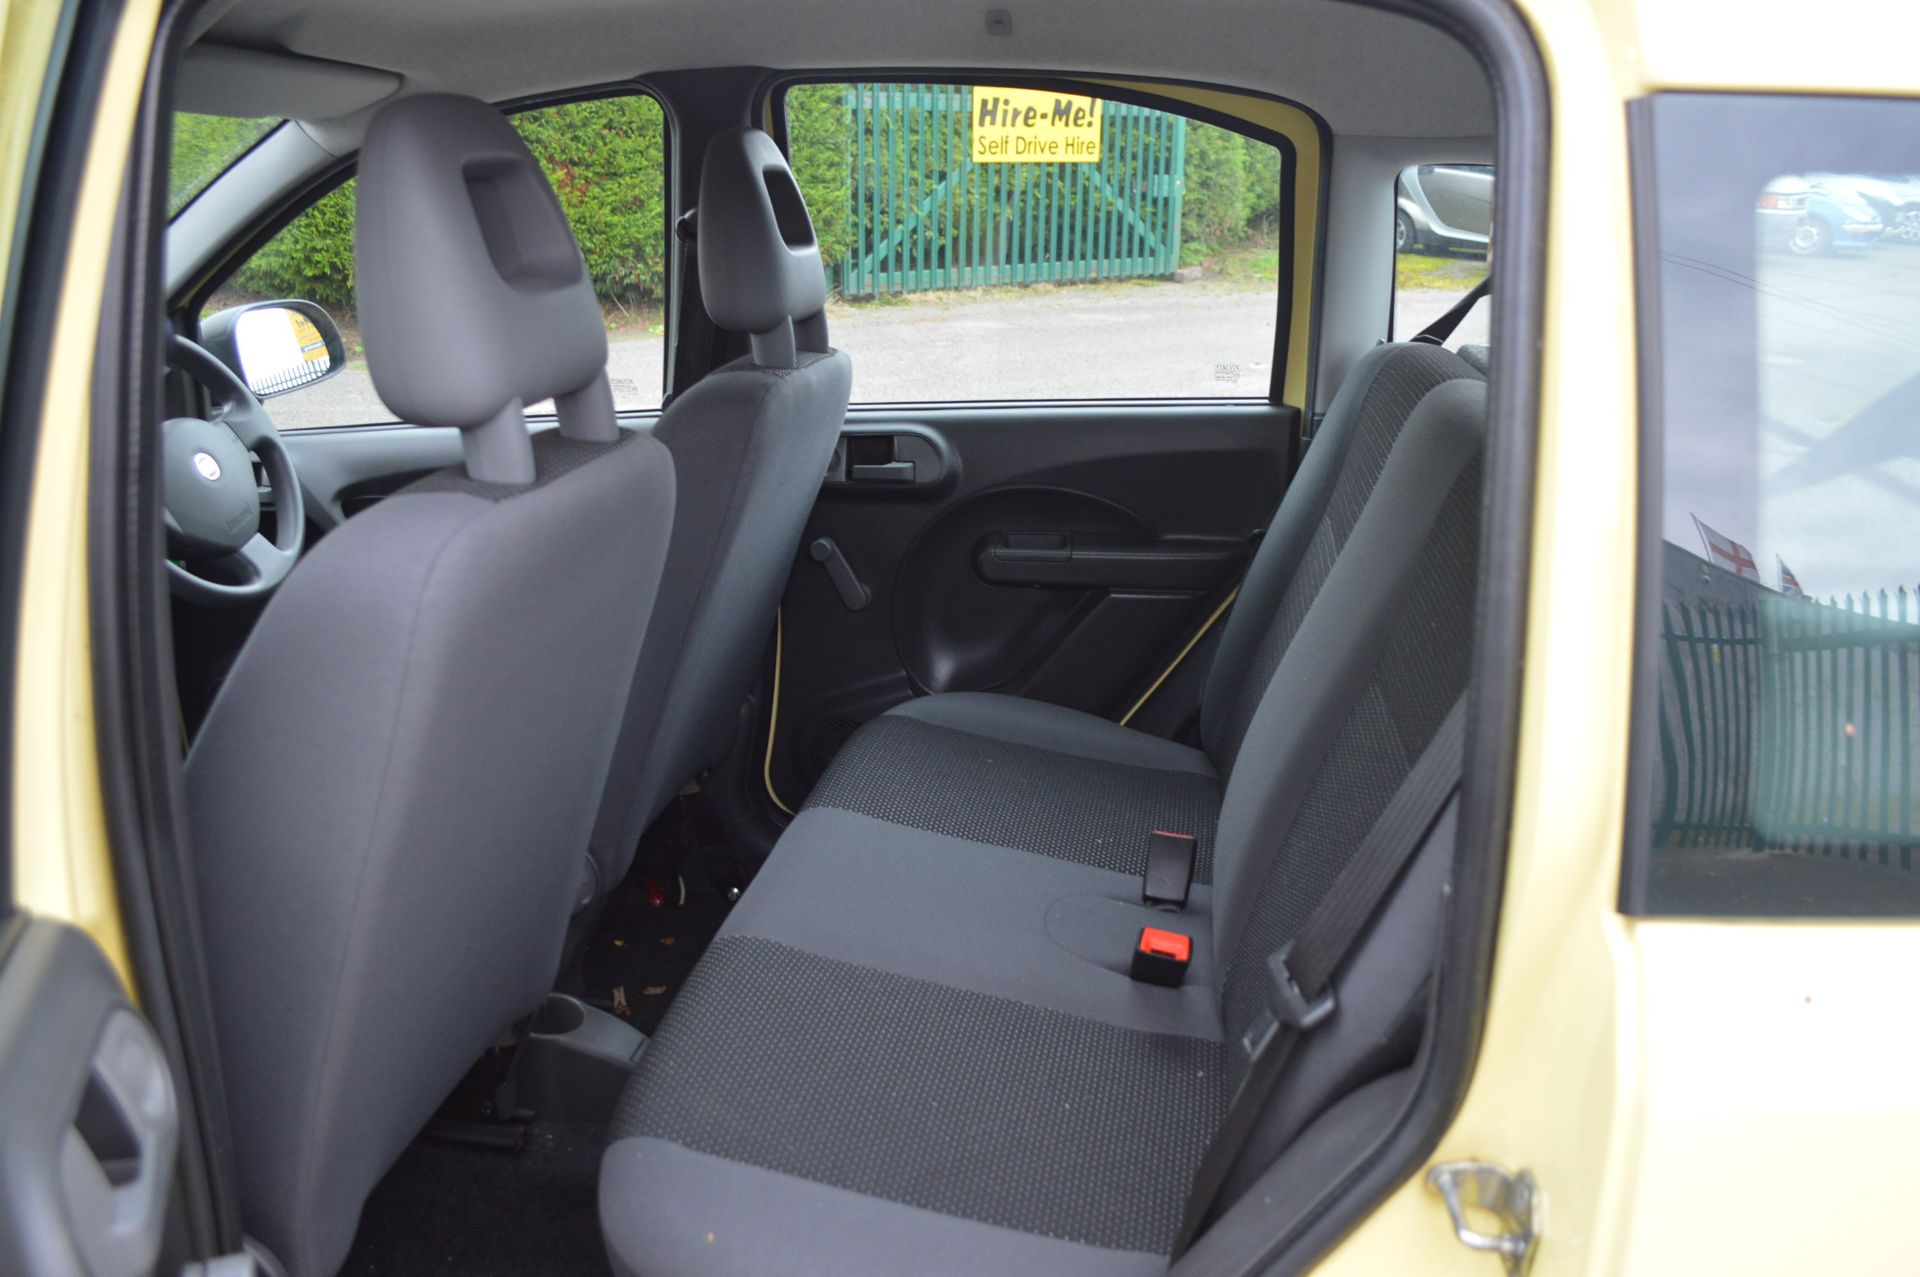 2010/59 REG FIAT PANDA ACTIVE ECO, SHOWING 1 OWNER FROM NEW - DRIVES GREAT - Image 14 of 25